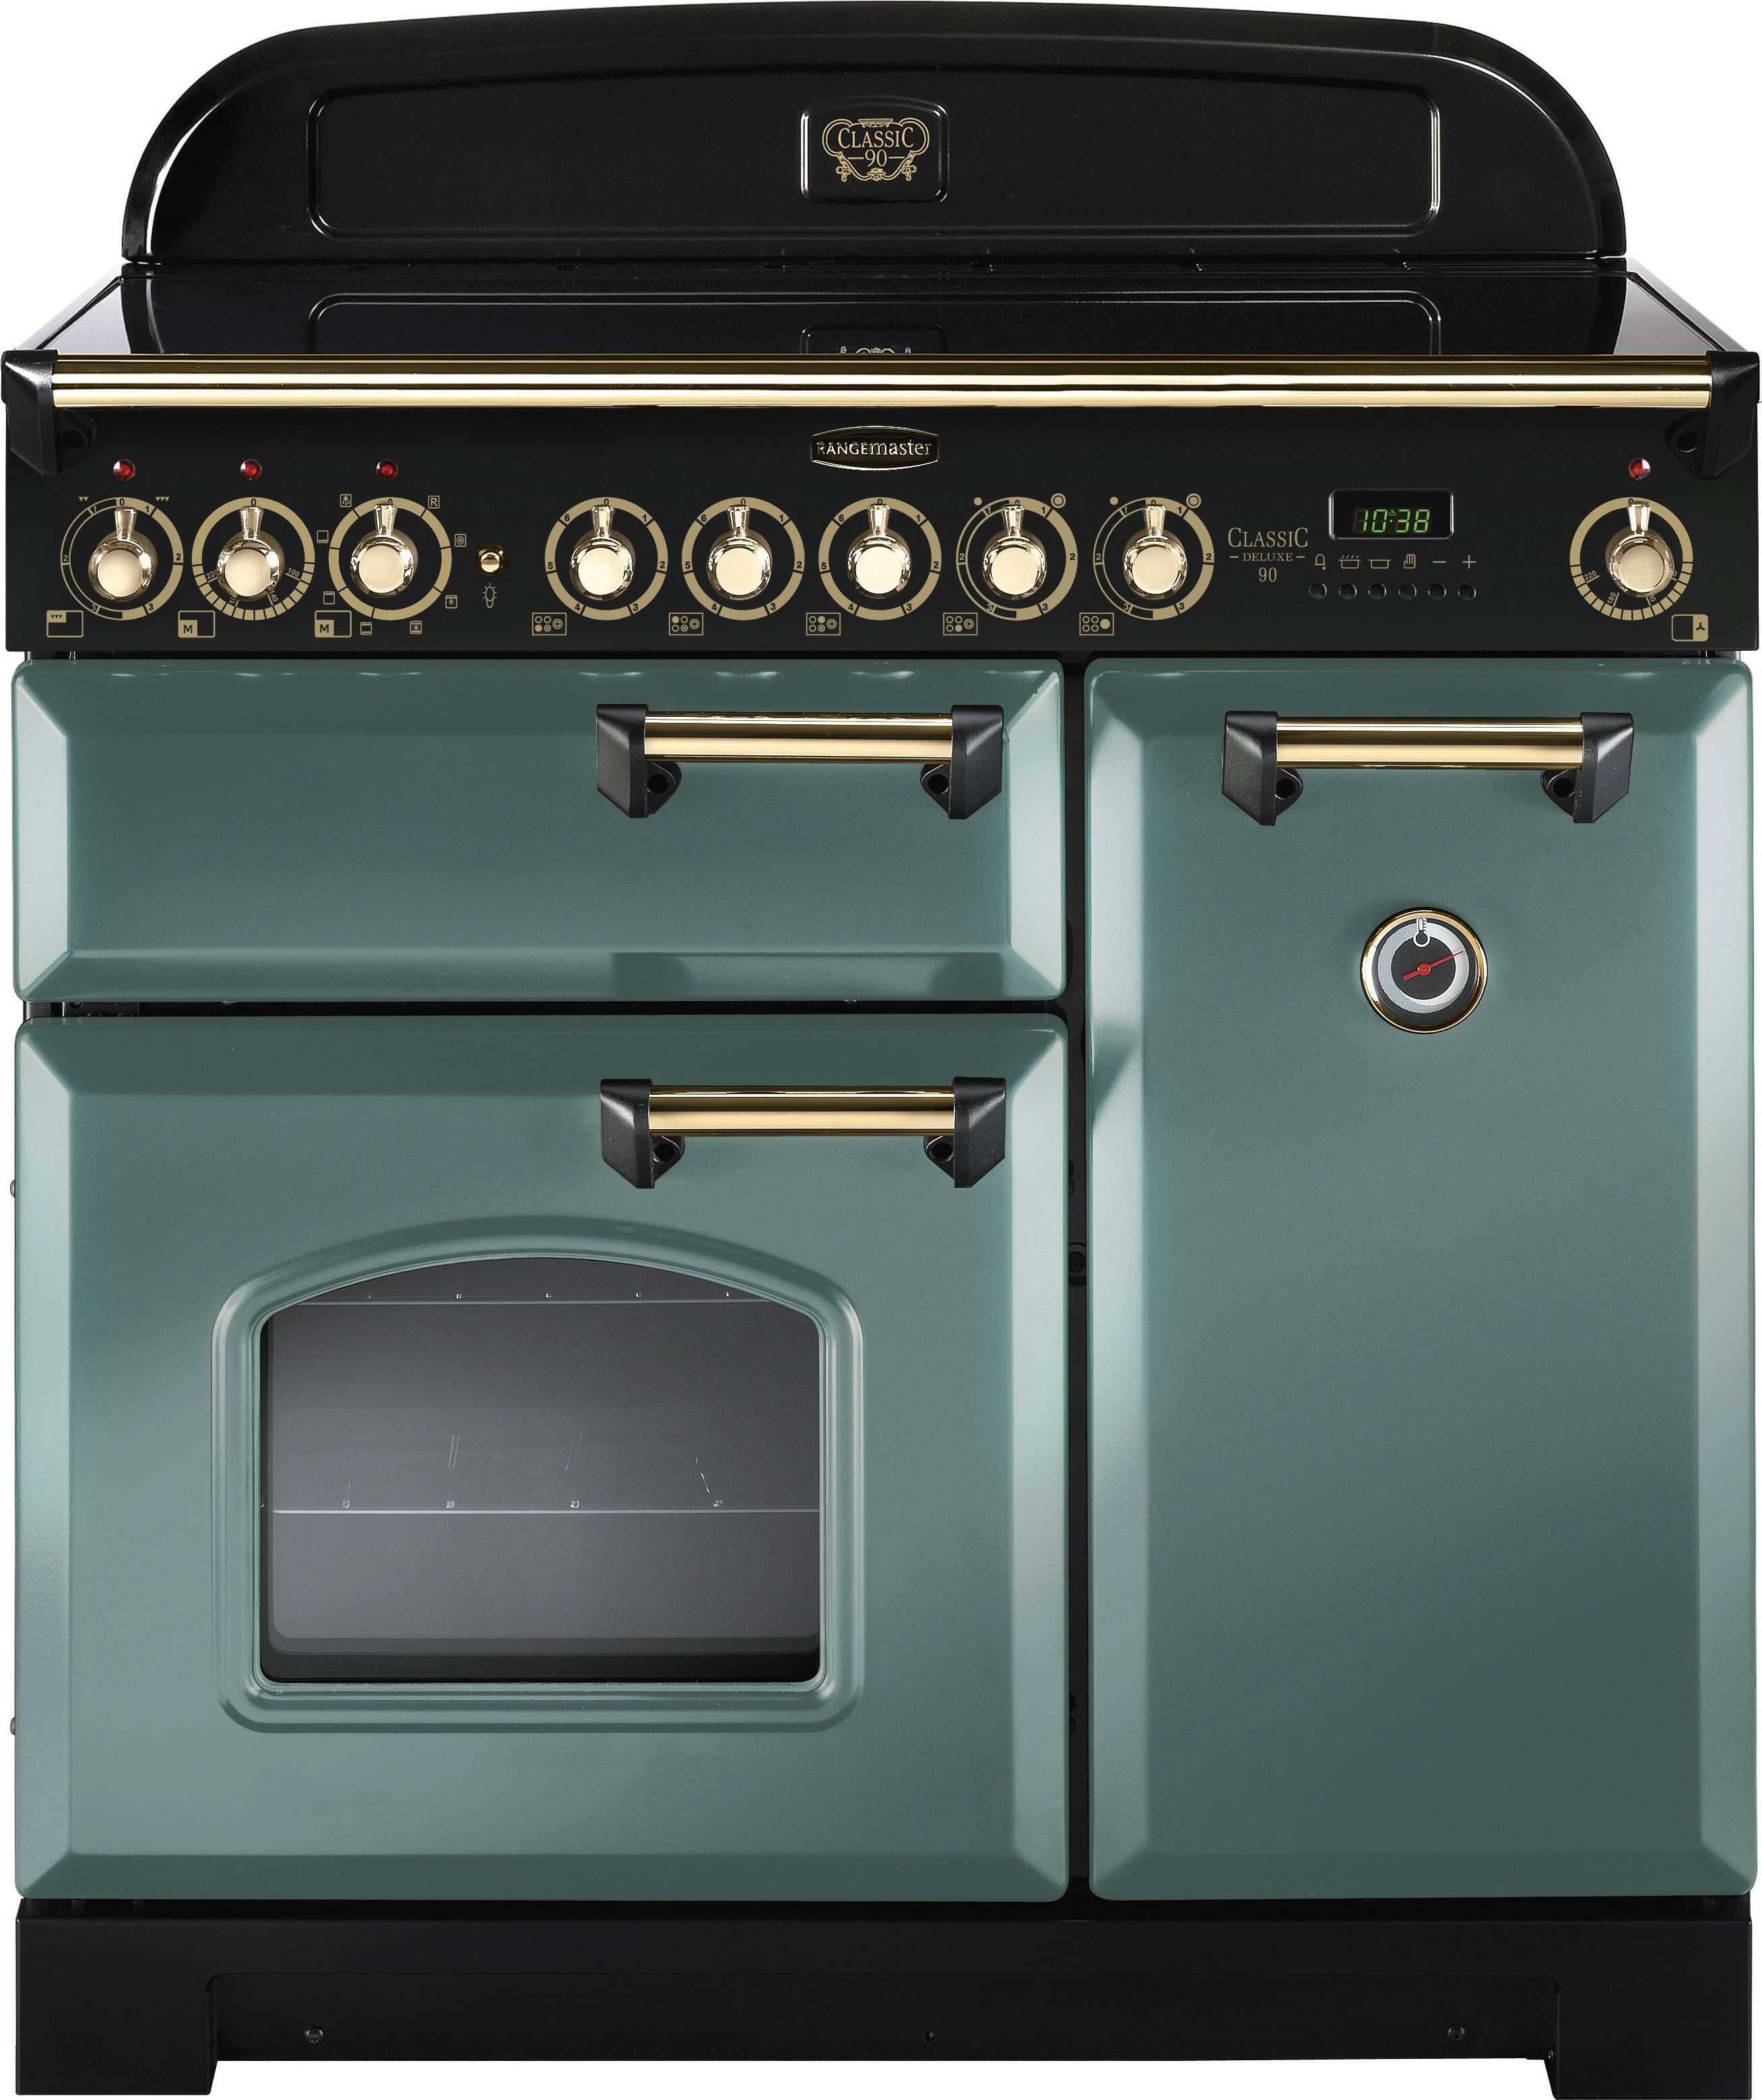 Rangemaster Classic Deluxe CDL90ECMG/B 90cm Electric Range Cooker with Ceramic Hob - Mineral Green / Brass - A/A Rated, Green